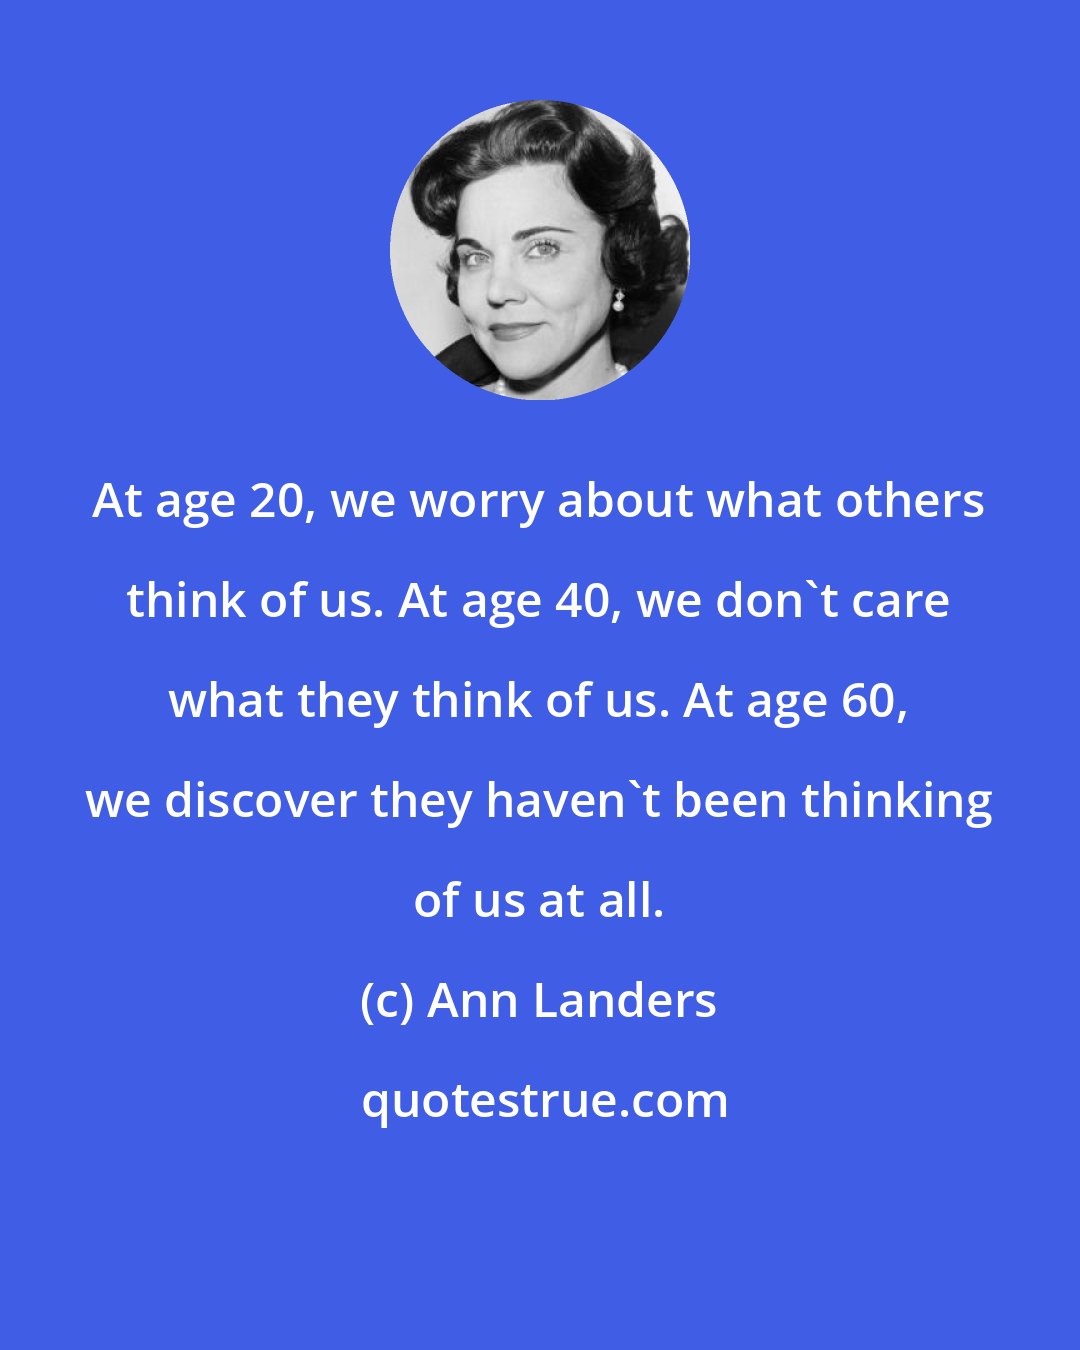 Ann Landers: At age 20, we worry about what others think of us. At age 40, we don't care what they think of us. At age 60, we discover they haven't been thinking of us at all.